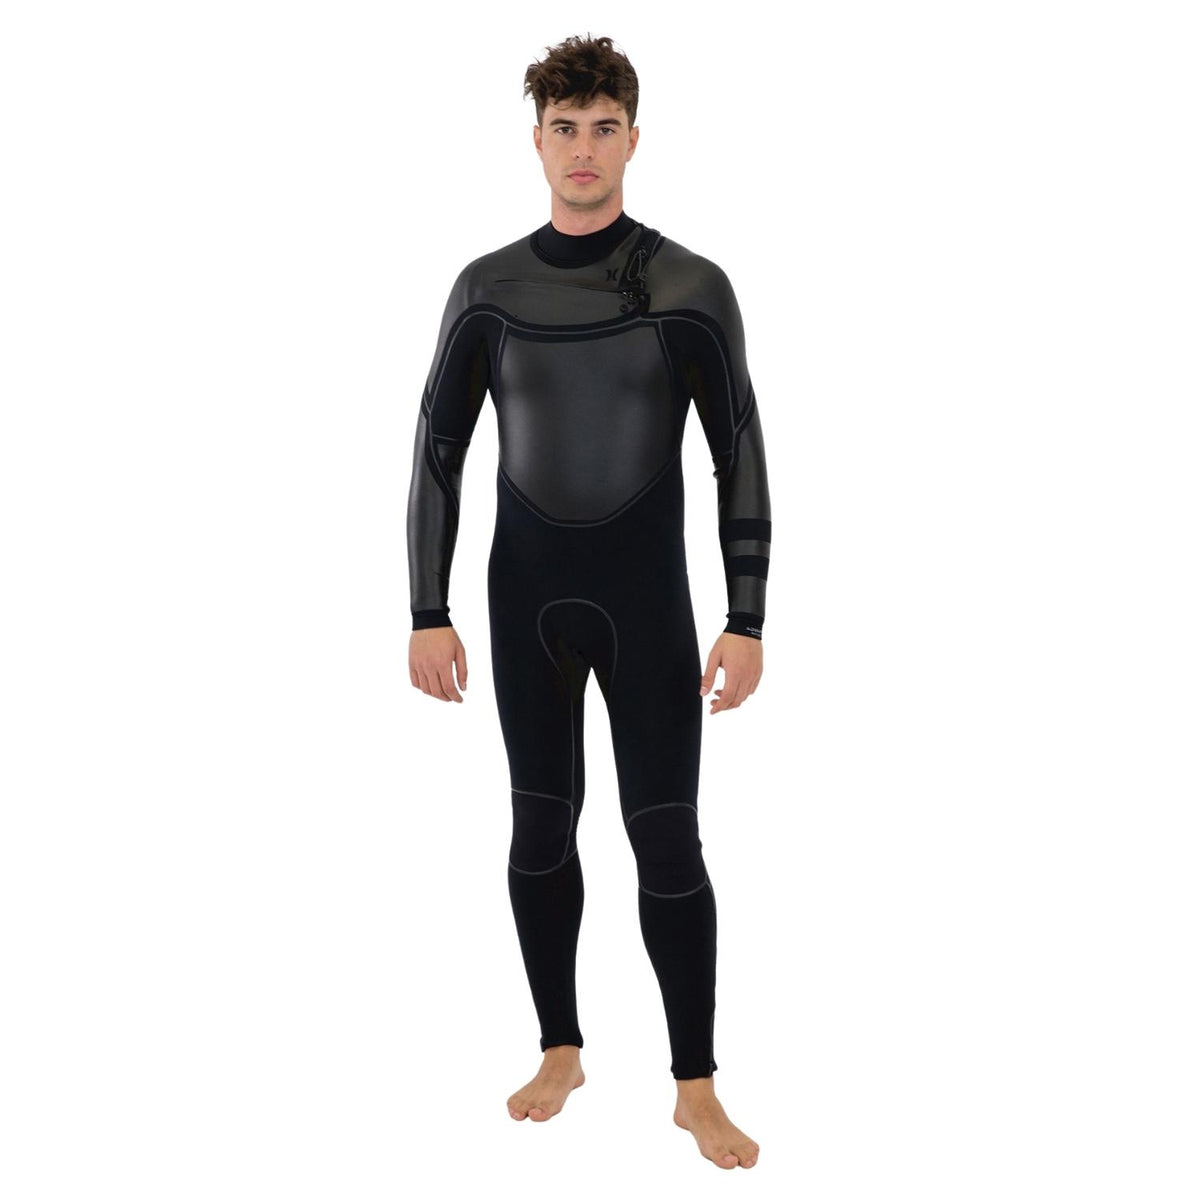 Hurley 4/3 Advantage Max Chest Zip Full Wetsuit - Black - Mens Full Length Wetsuit by Hurley